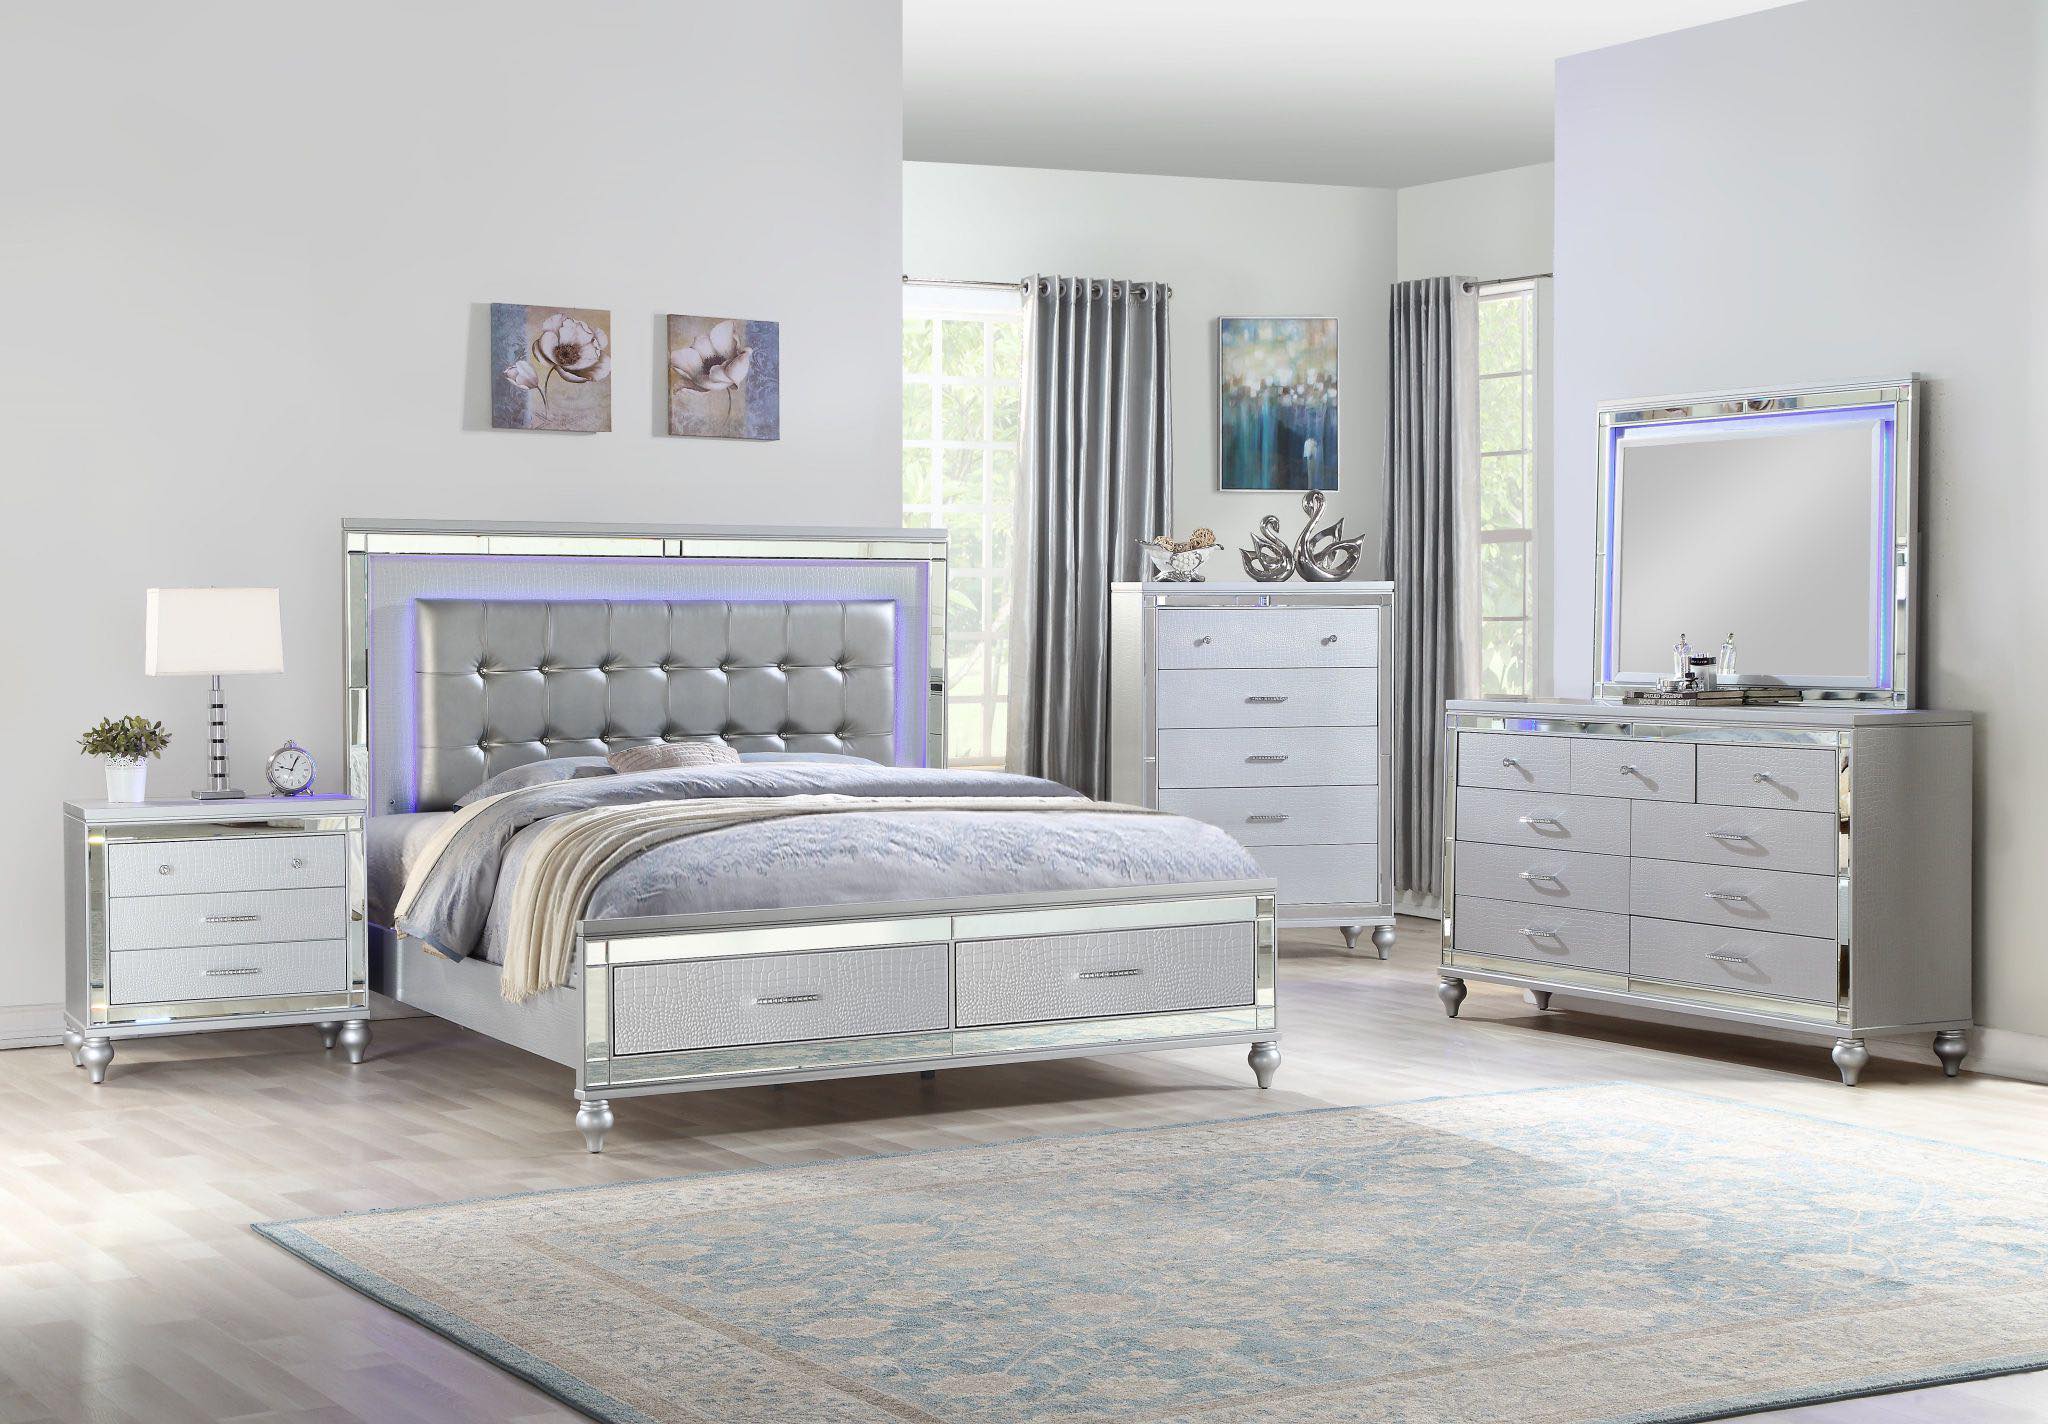 VALENTINO 2.0 - MODERN BEDROOM SET WITH LED LIGHTS AND STORAGE